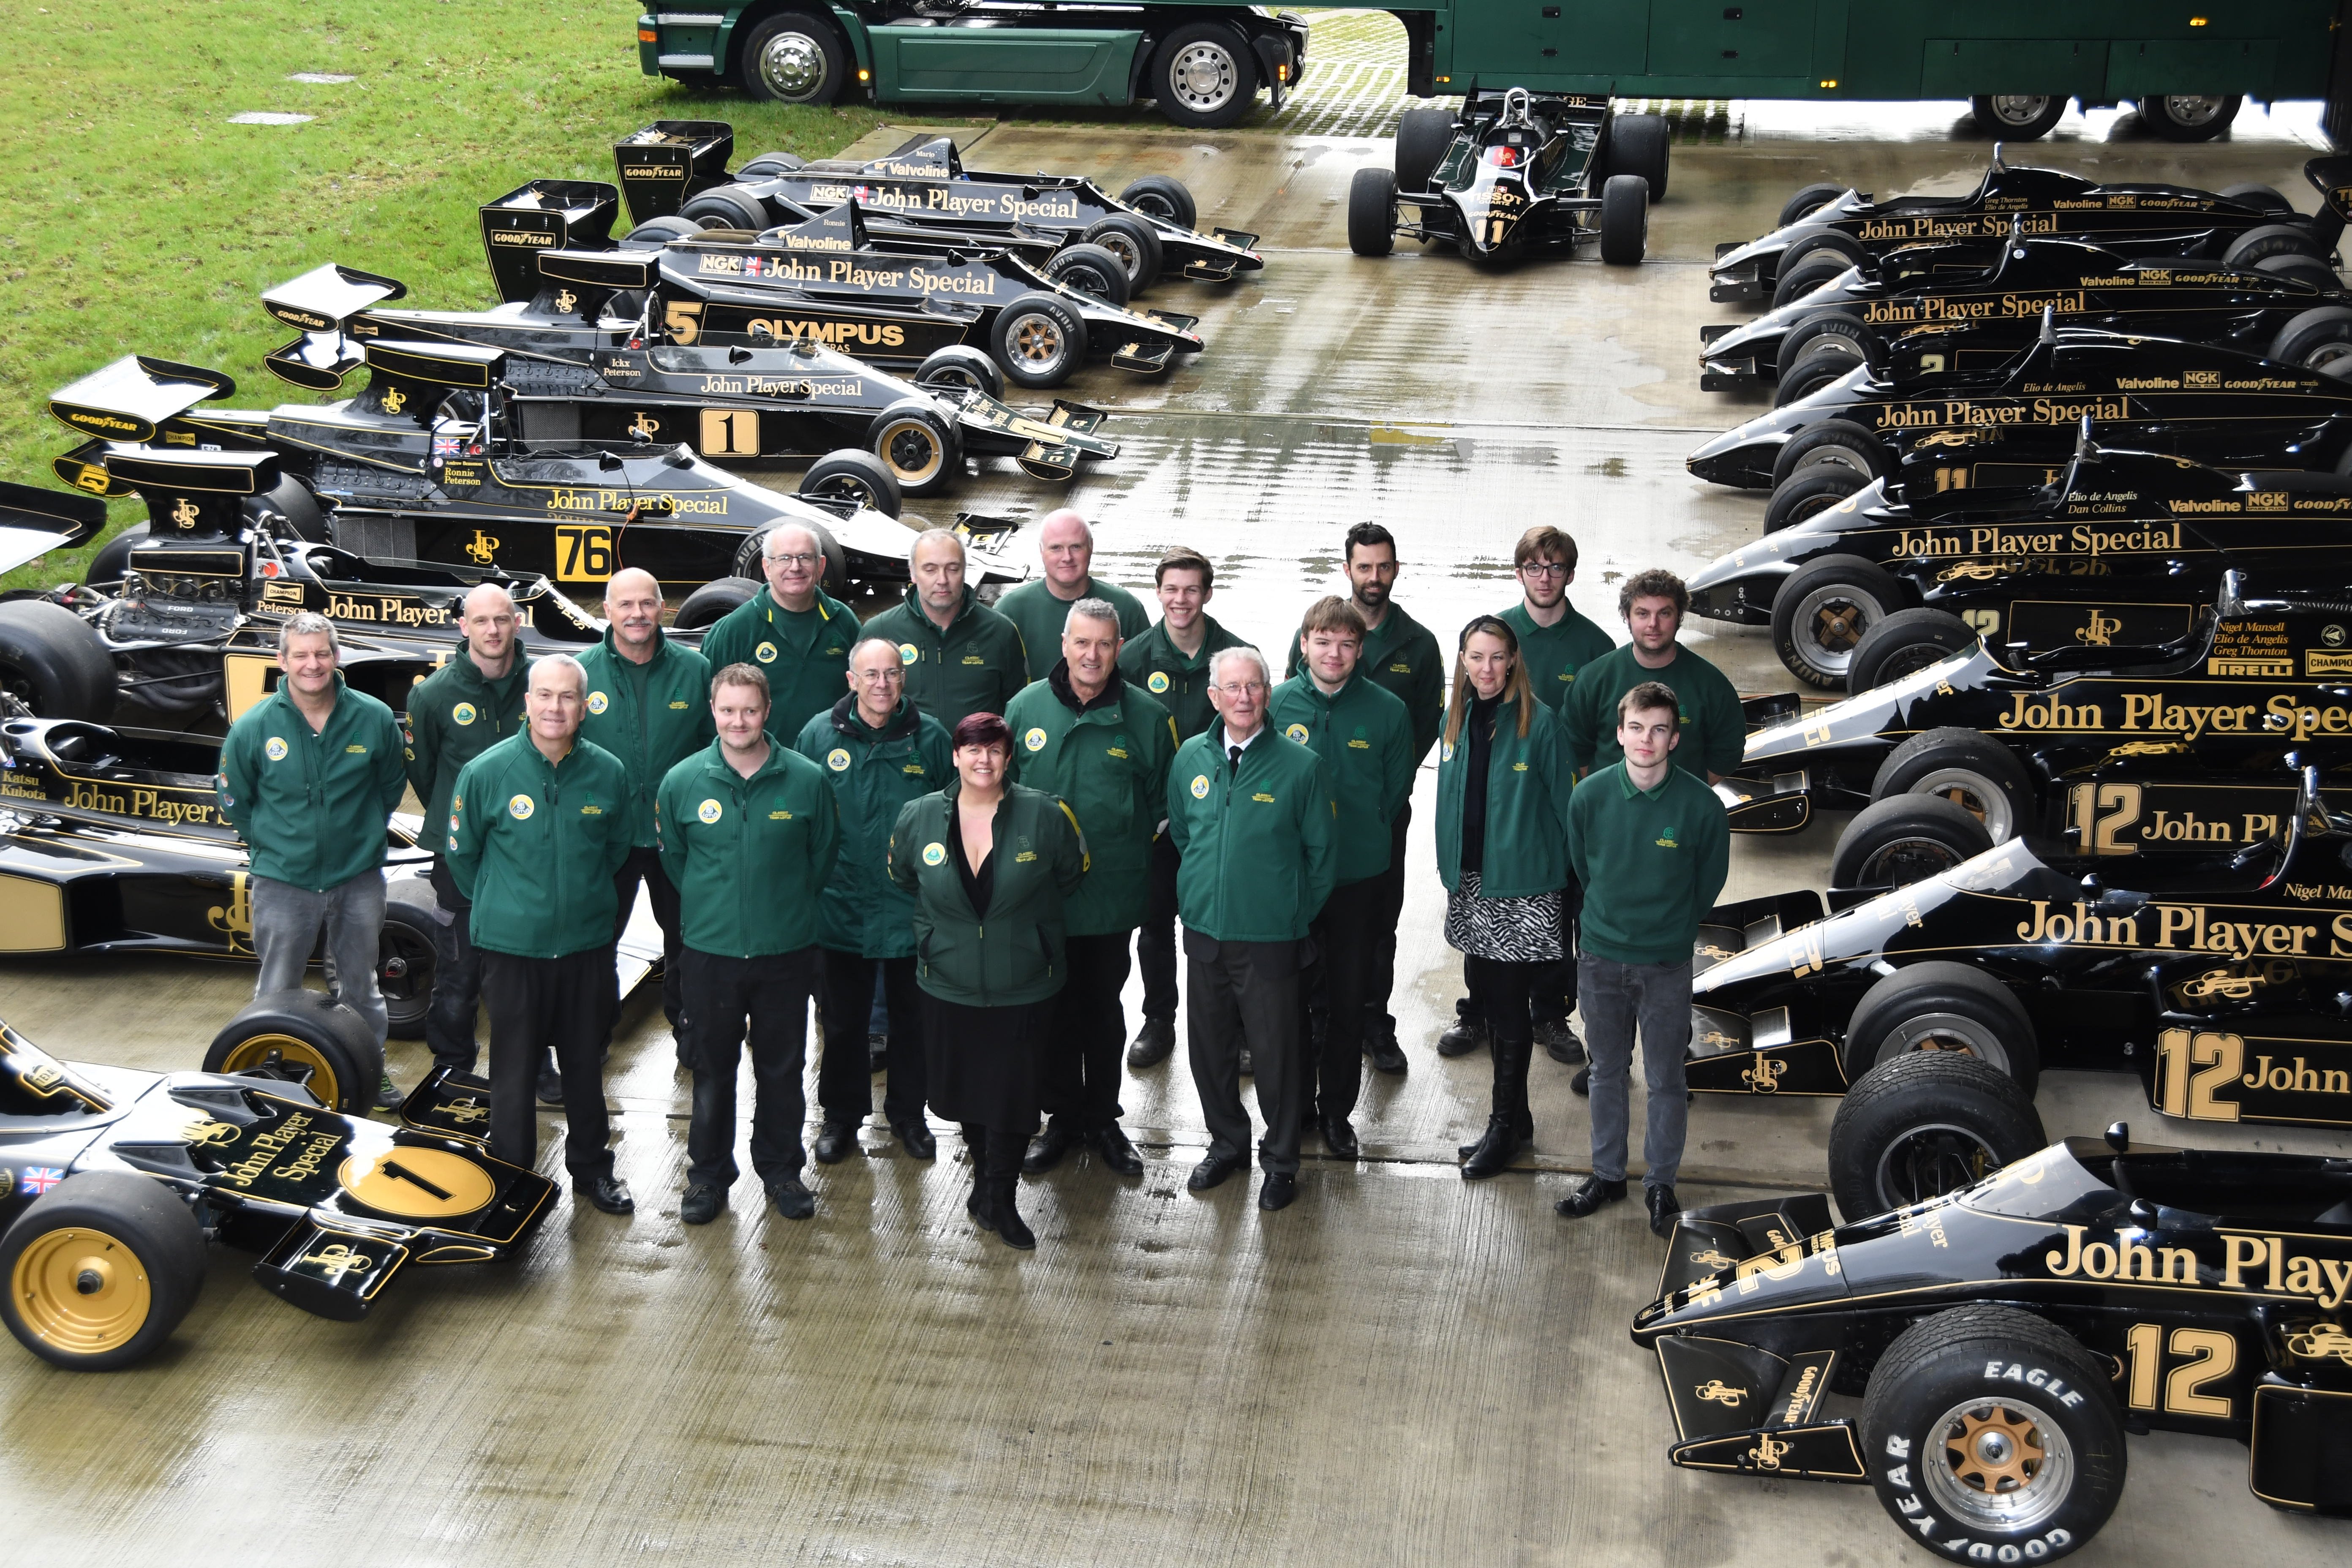 Classic Team Lotus brought together the best collection of JPS liveried Team Lotus Formula 1 cars ever amassed in one place on 25 January 2019.